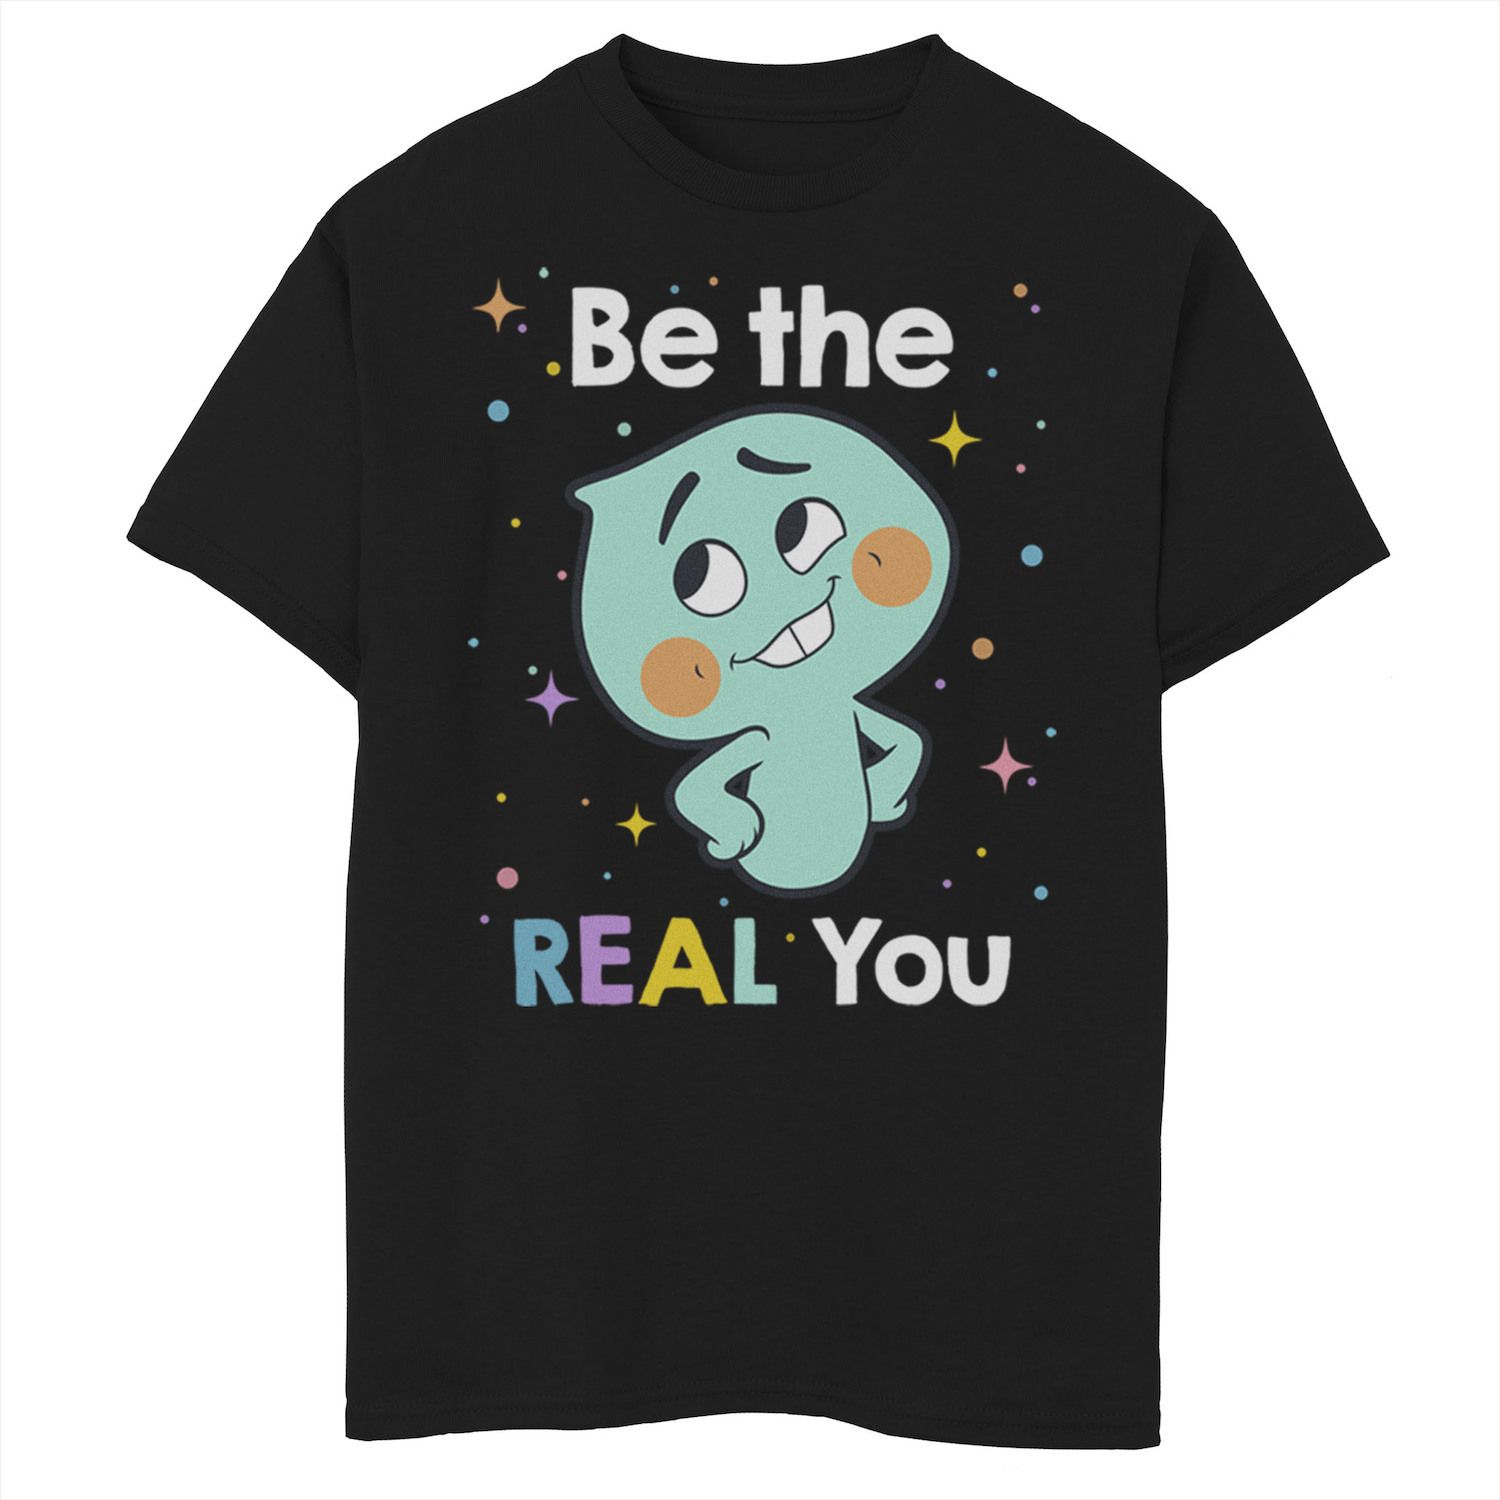 Image for Disney / Pixar 's Soul Boys 8-20 22 Be The Real You Graphic Tee at Kohl's.